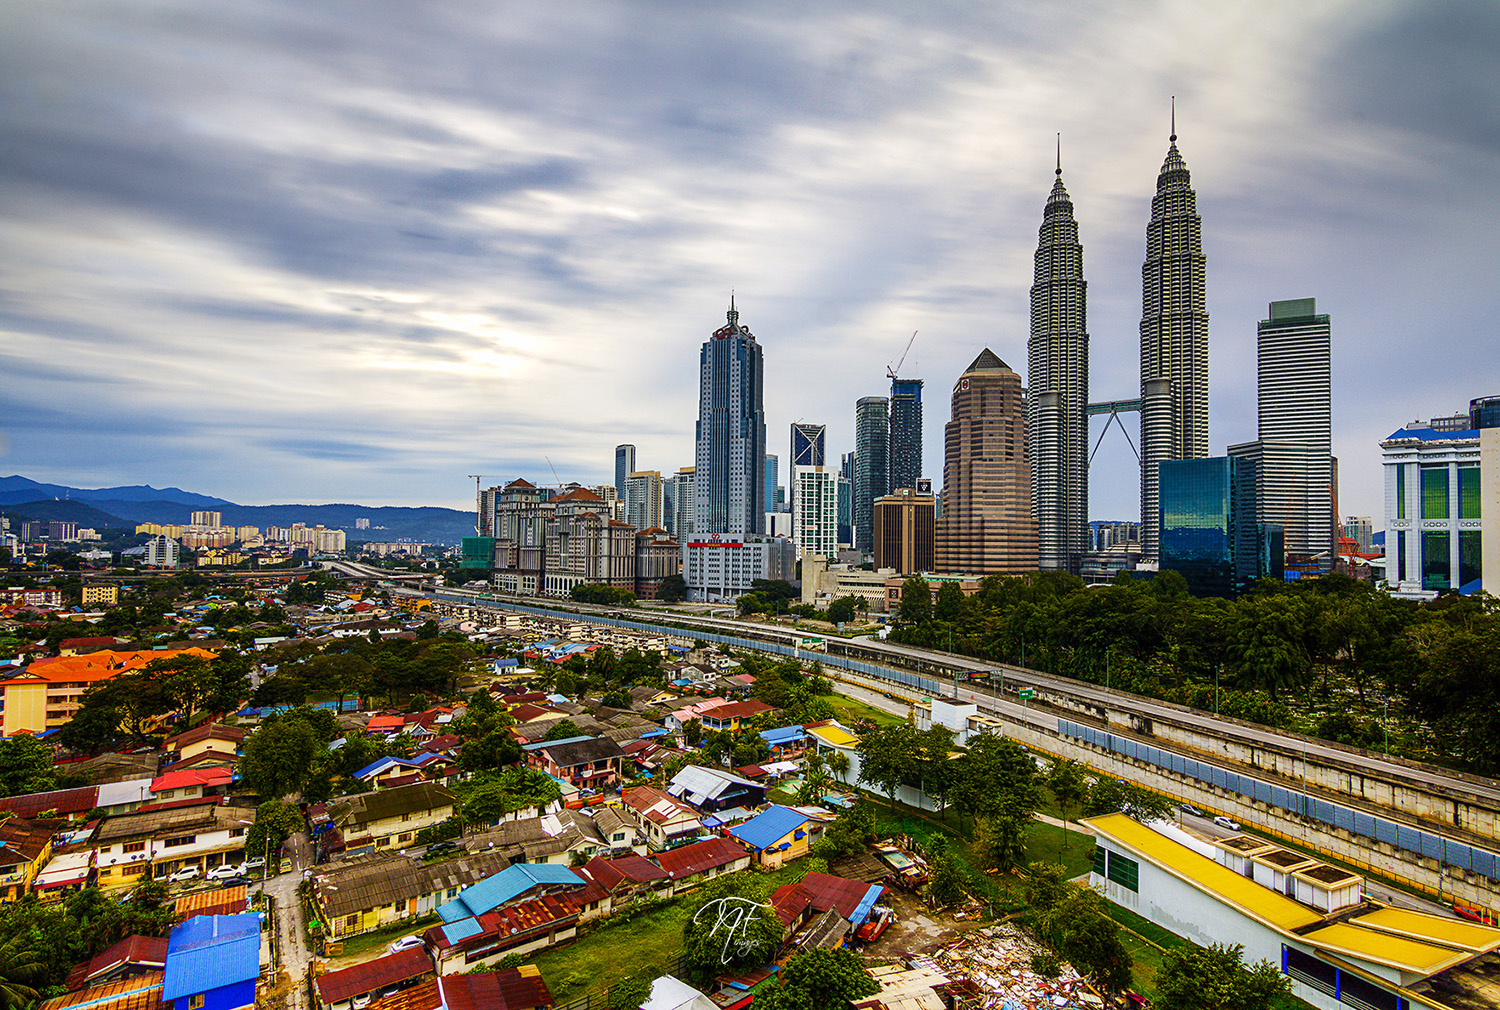 KL contrasts: traditional village Kampung Baru in the shadow of Kuala Lumpur's futuristic skyline. Image by Naim Fadil / CC BY-SA 2.0